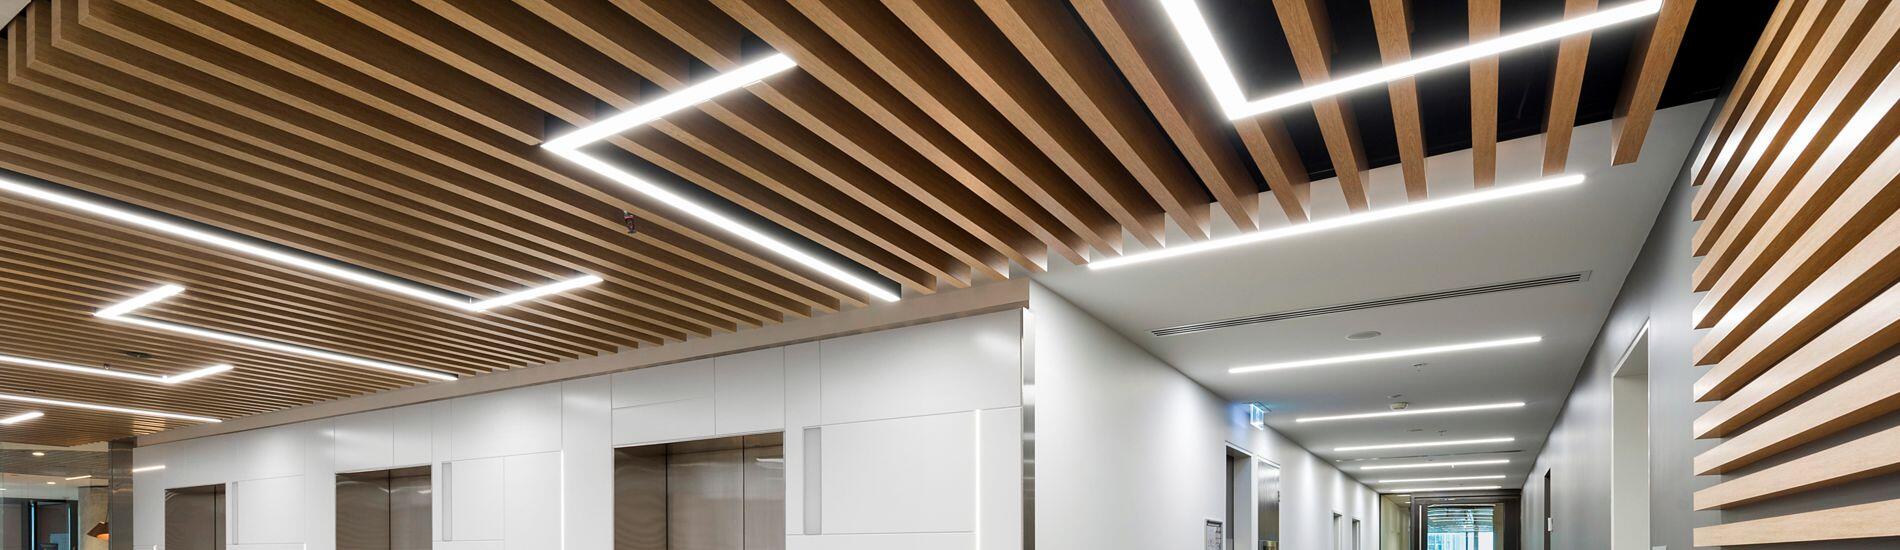 Matched Lightweight MAXI BEAM Ceiling and SUPASLAT Slatted Wall in Lift Lobby